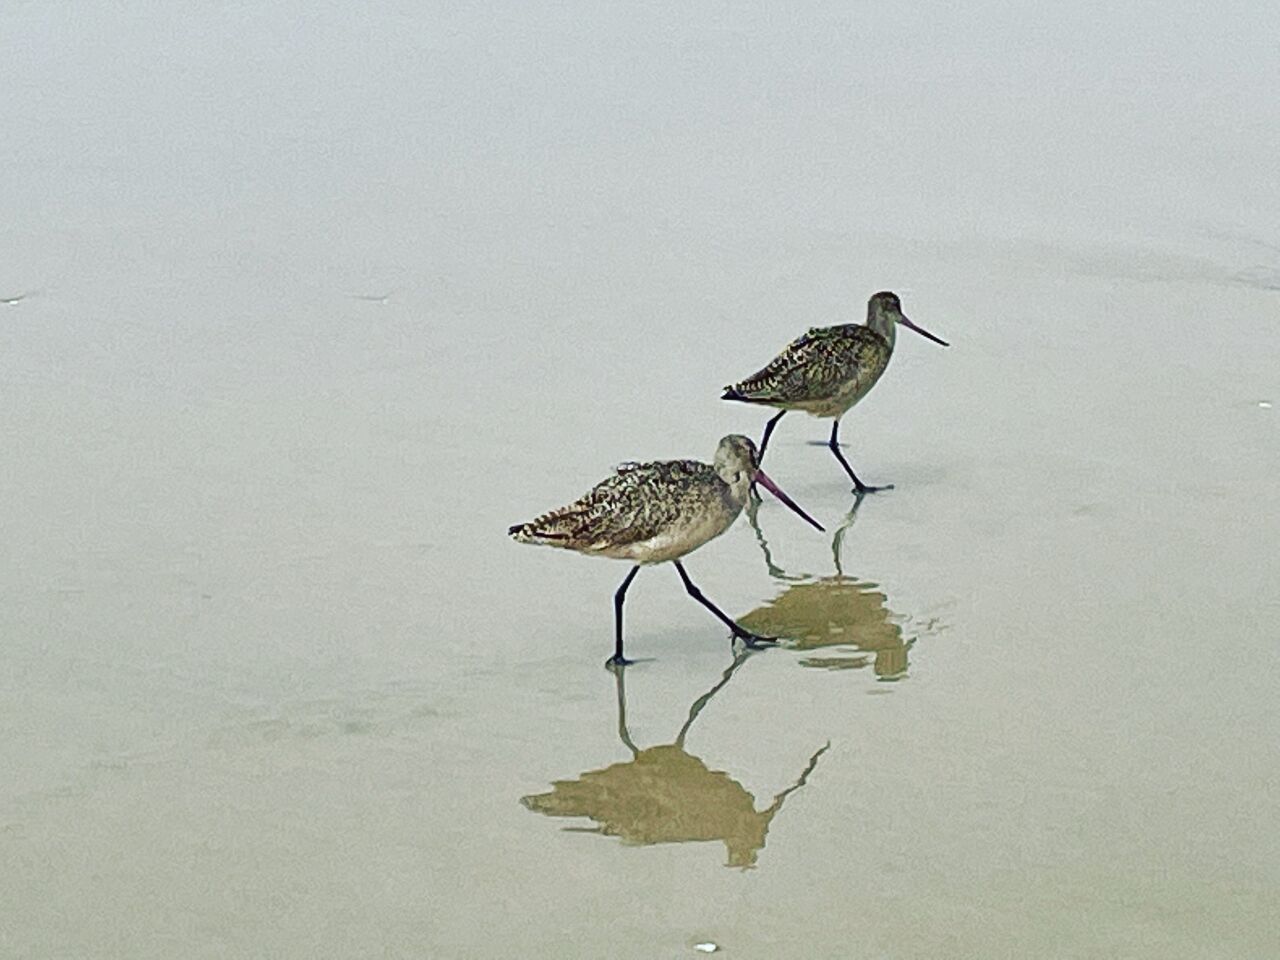 A couple of marbled godwits take a walk on the beach.